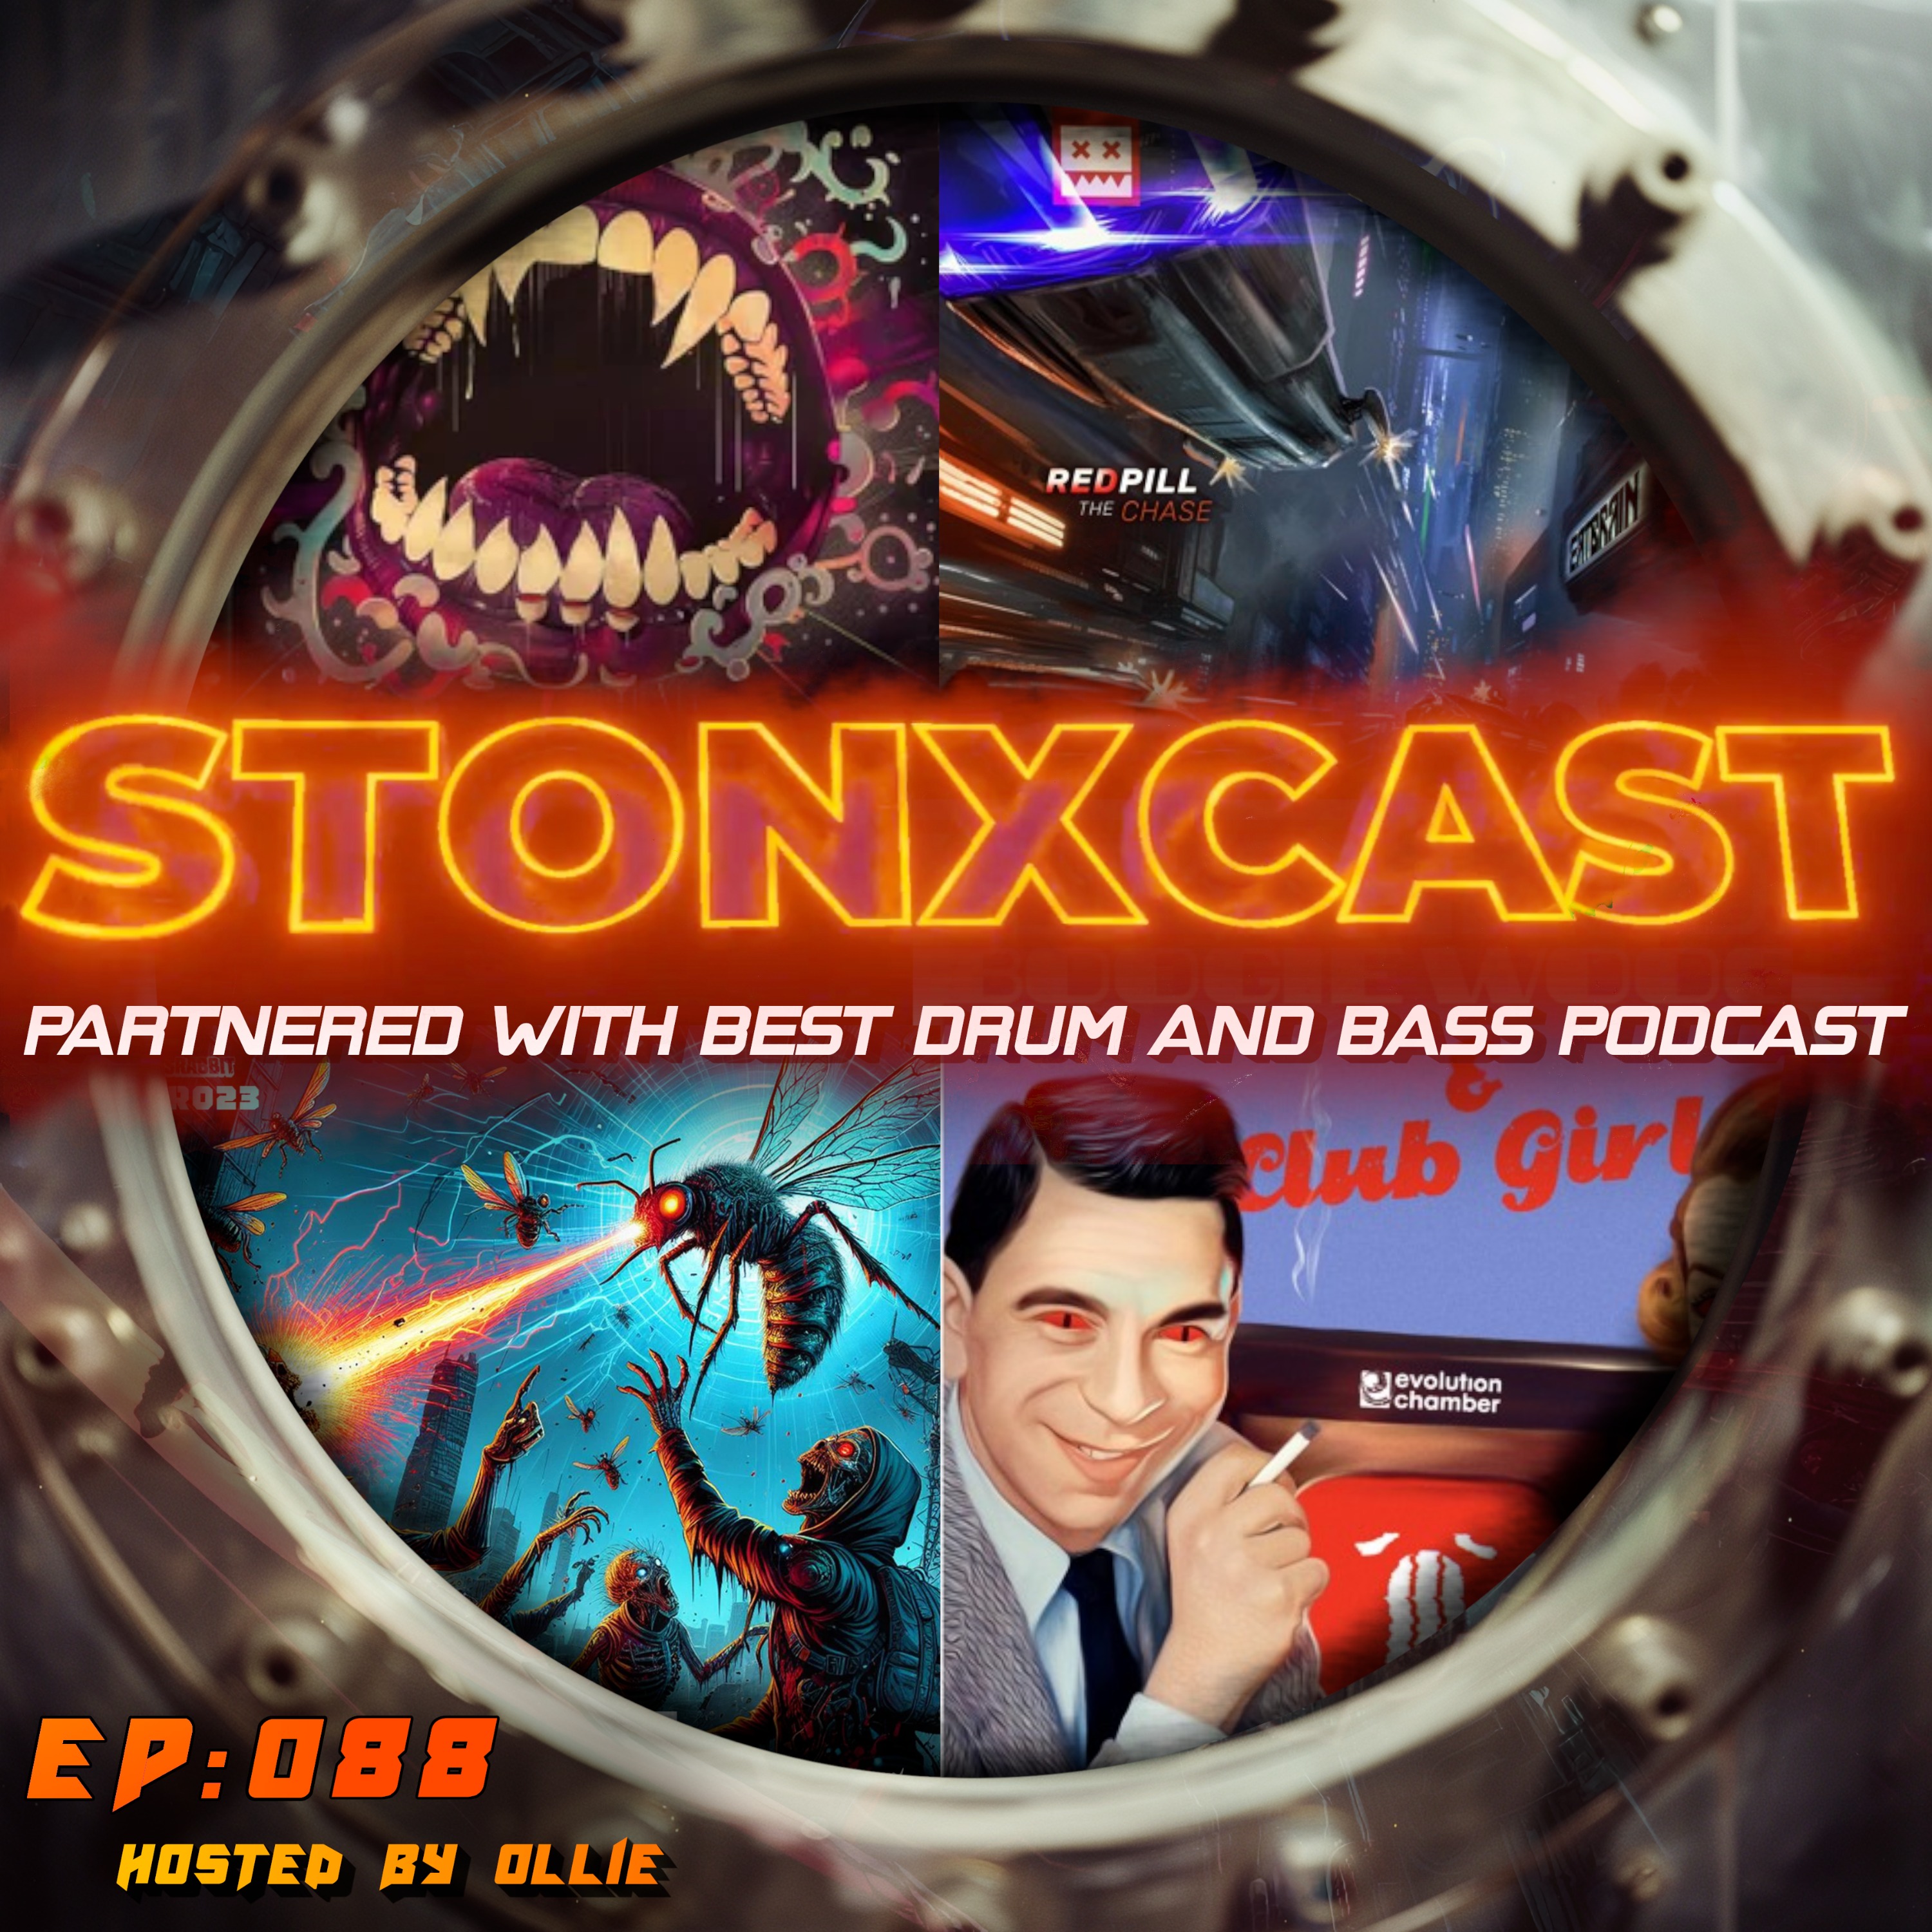 Stonxcast EP:088- Hosted by Ollie Artwork